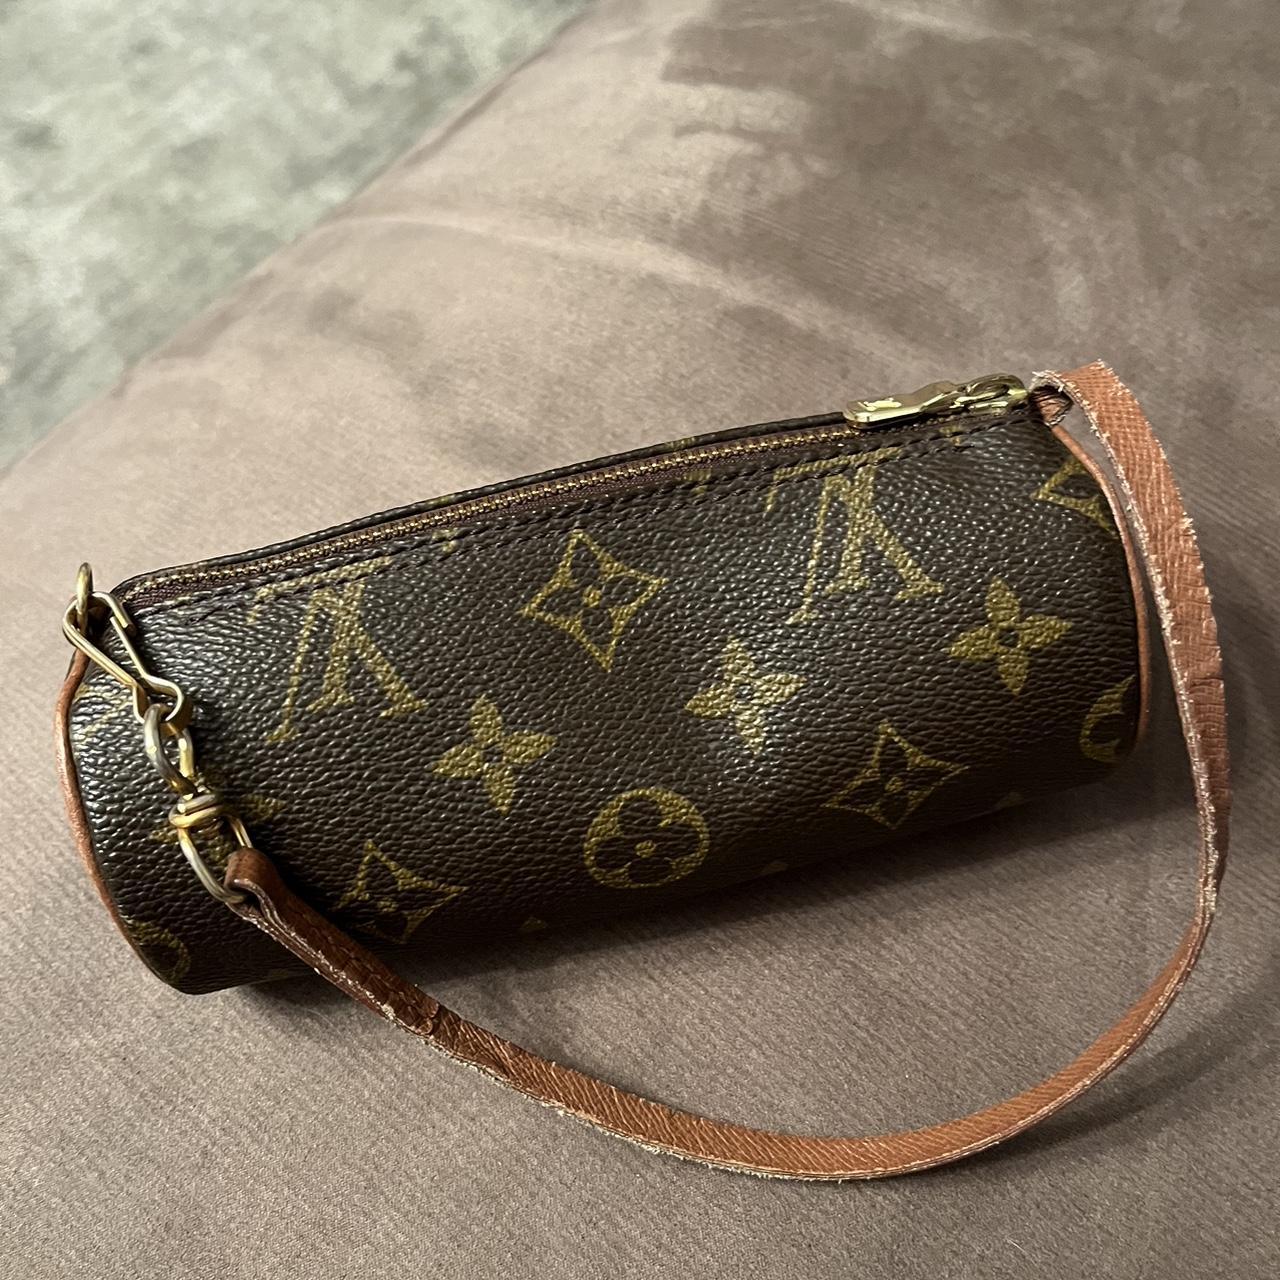 Louis Vuitton LV Paper Shopping Bag This is from the - Depop